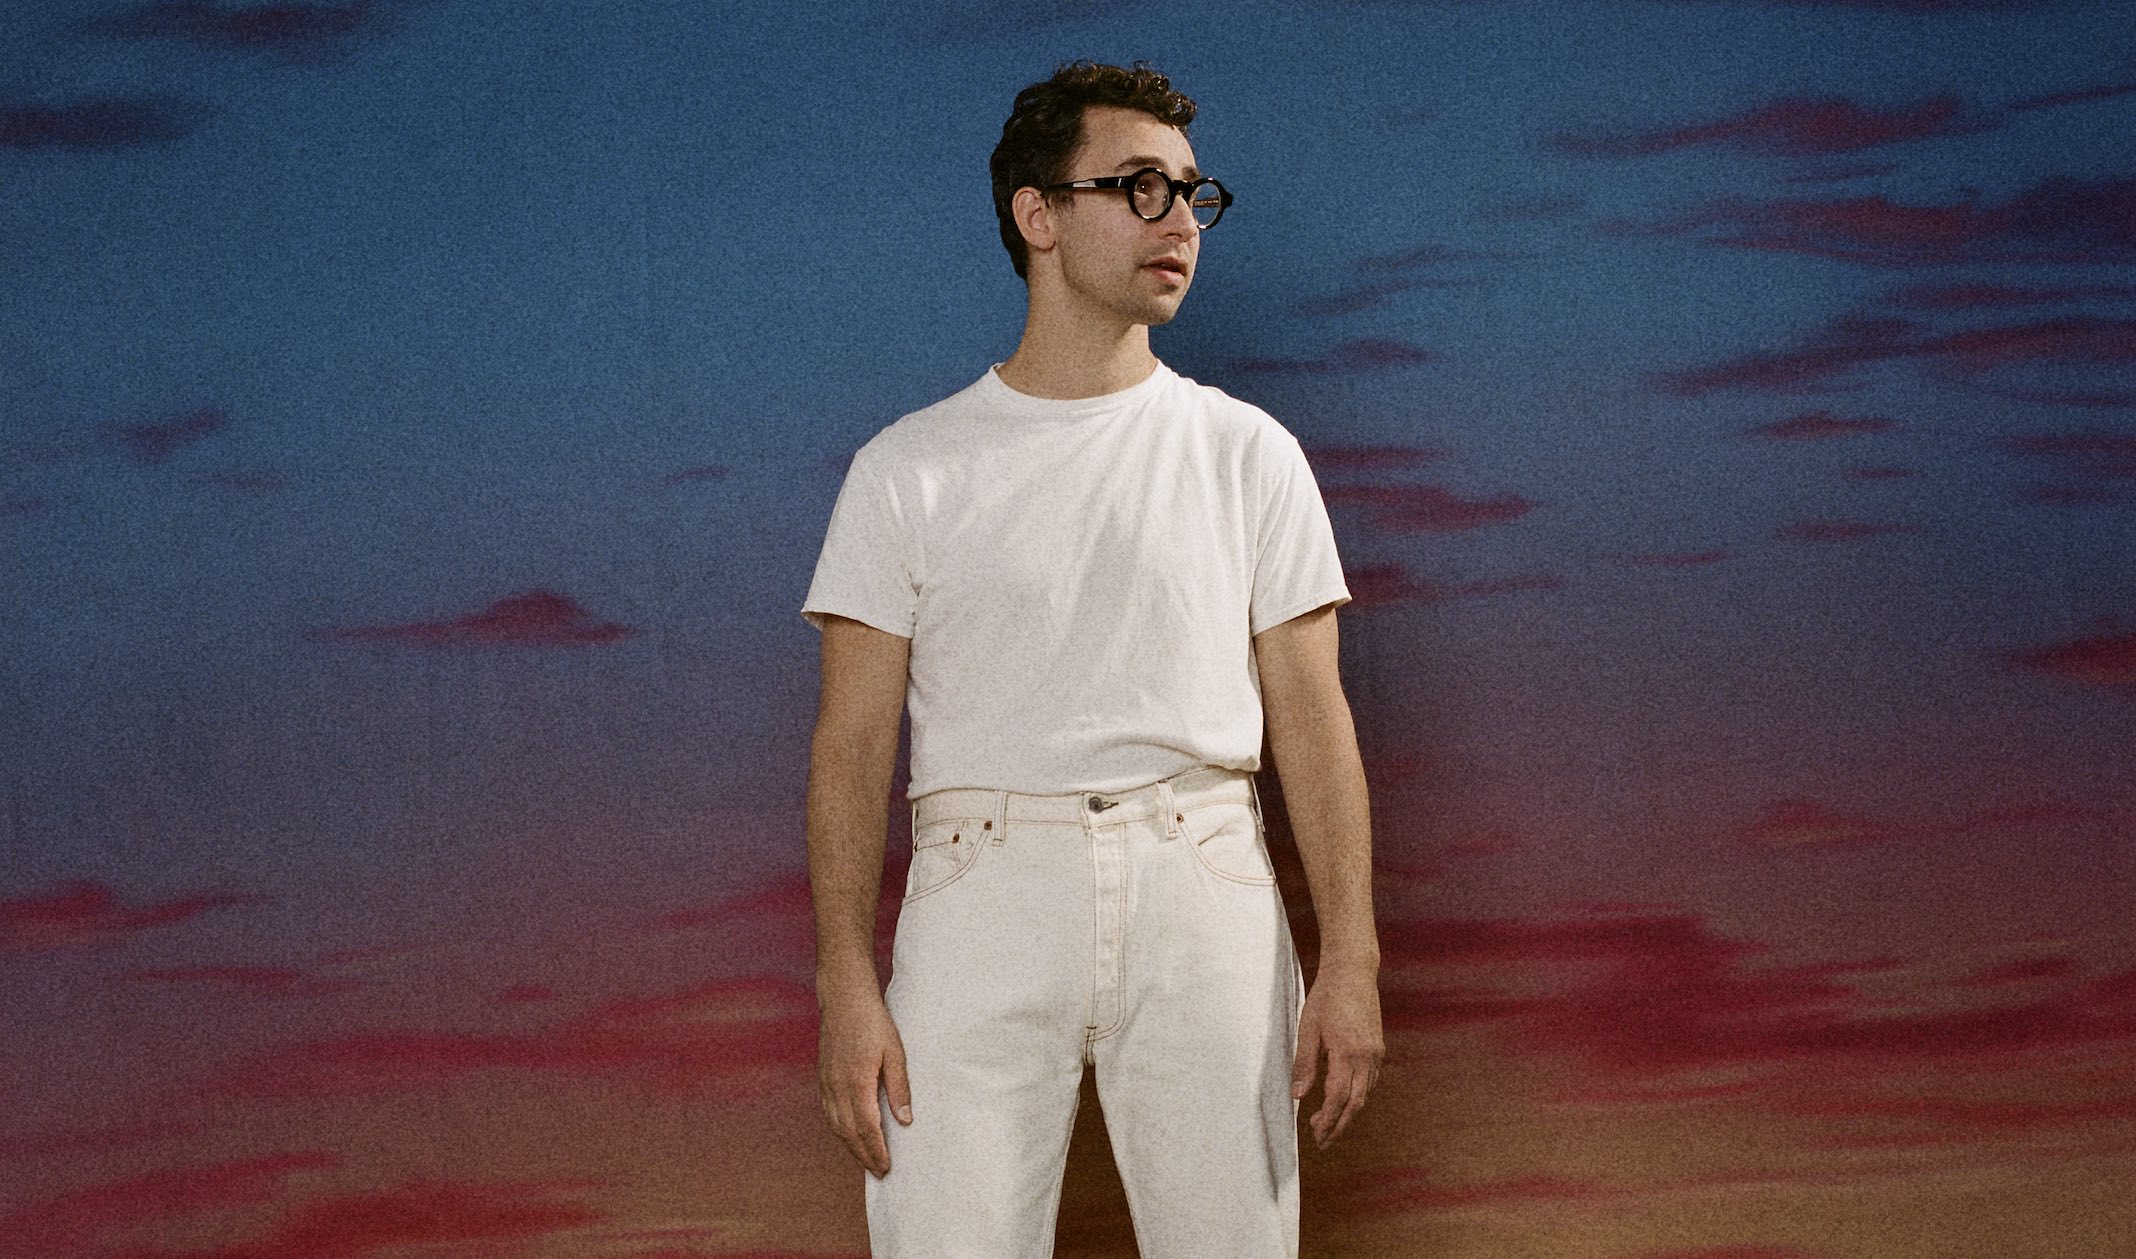 Bleachers - Take The Sadness Out Of Saturday Night review